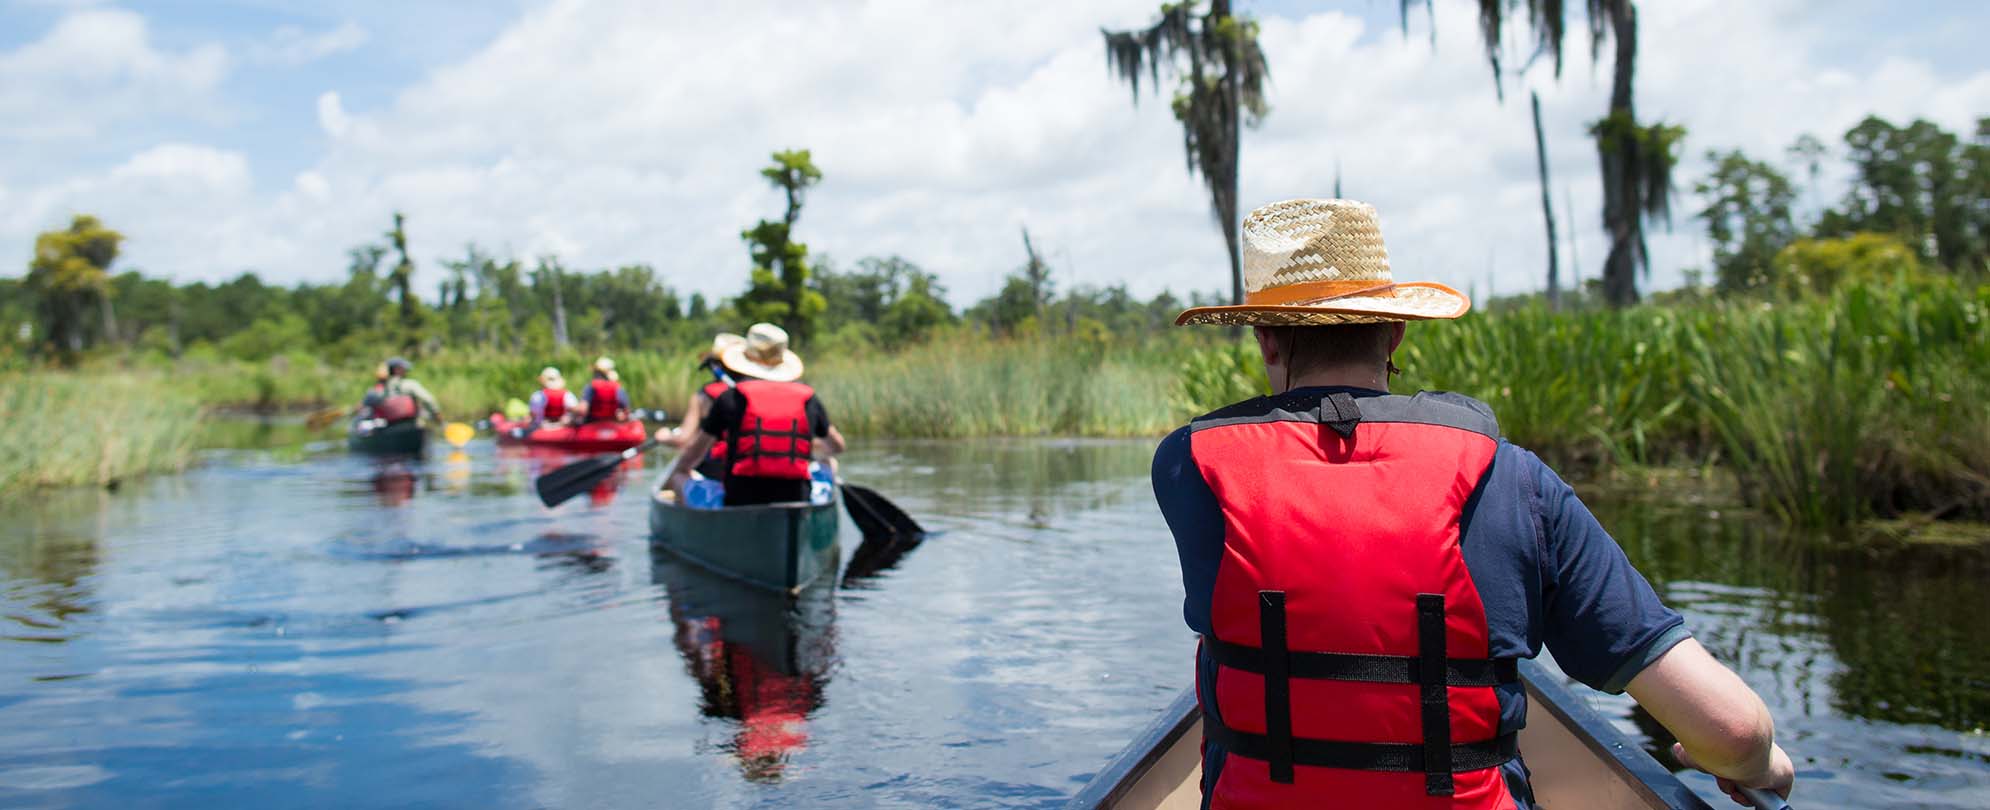 A group wearing life vests canoeing on a swamp tour in New Orleans